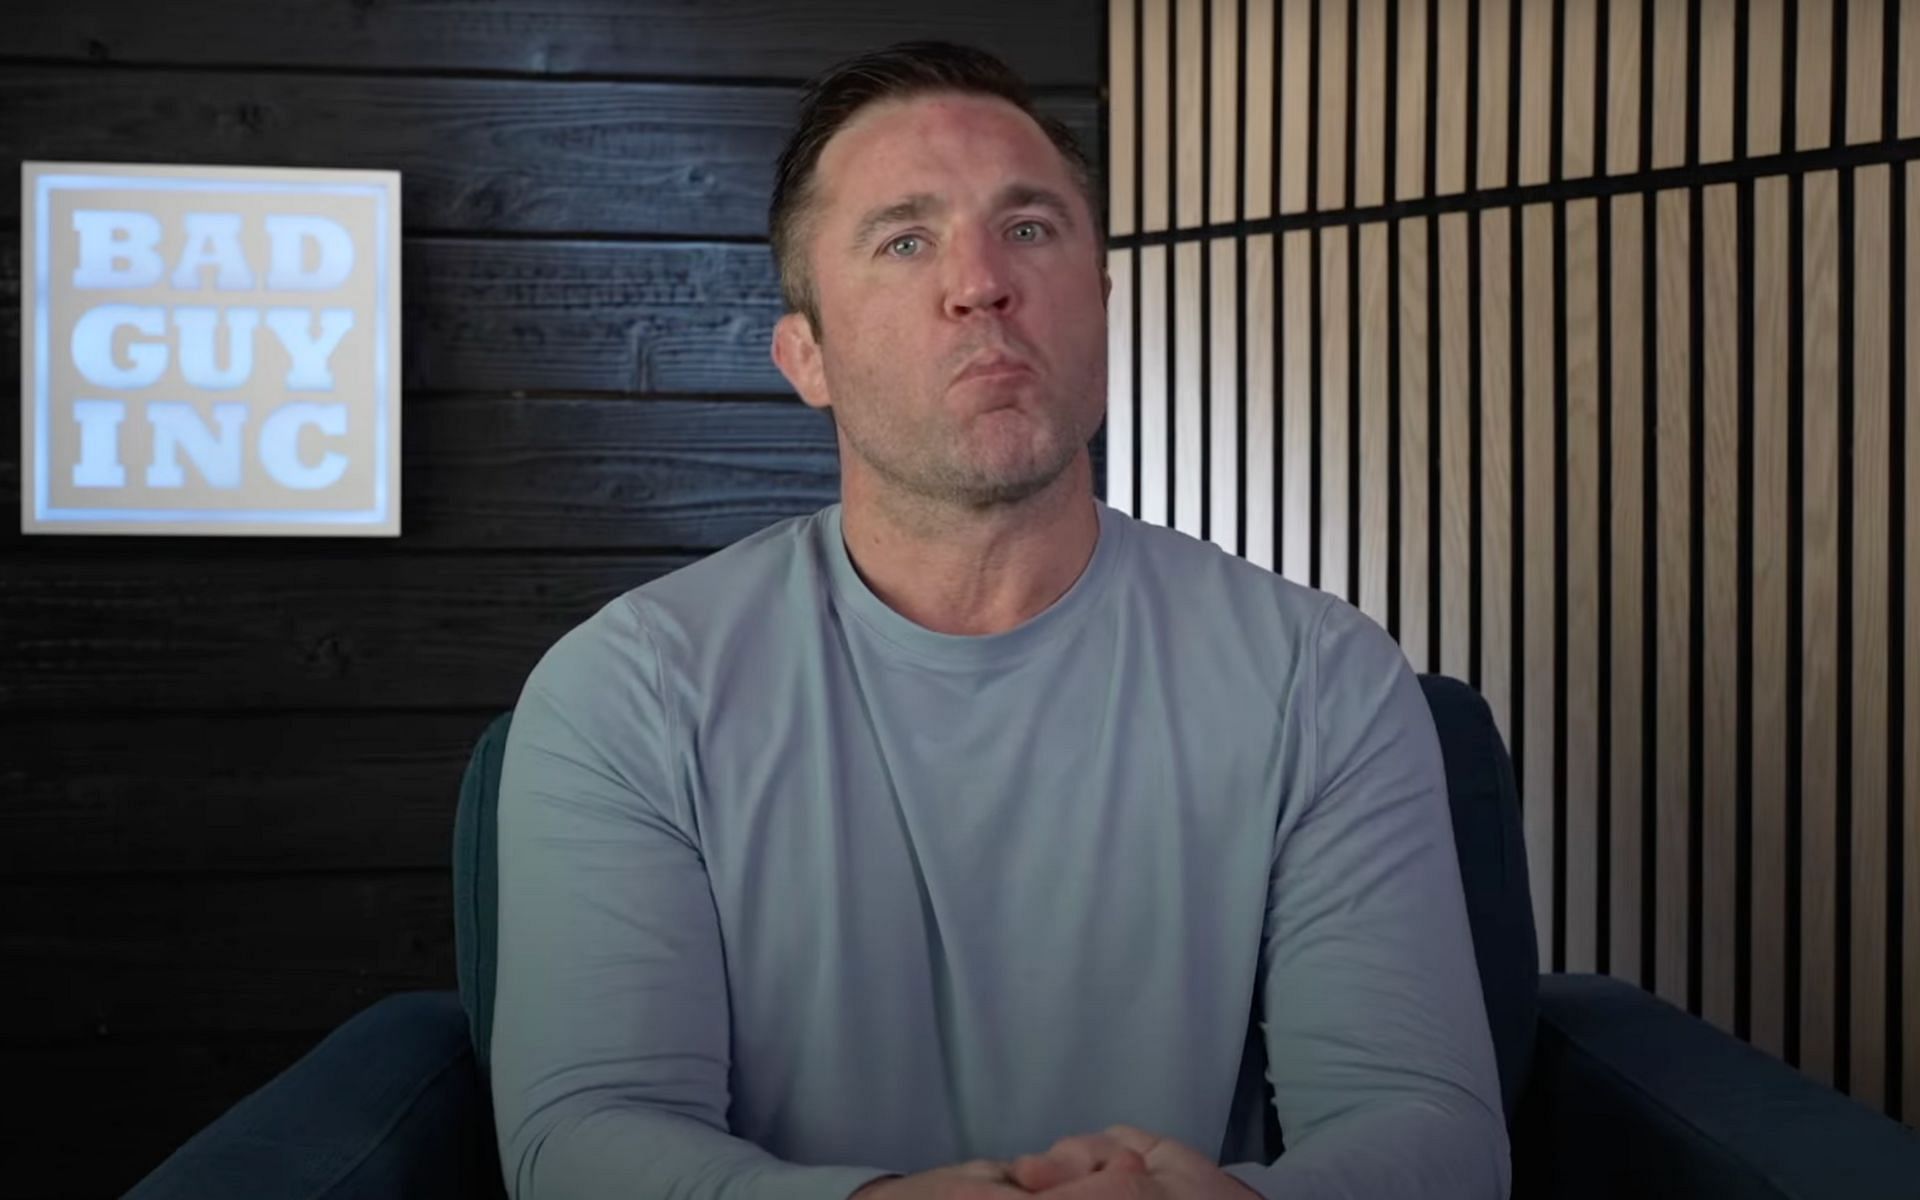 Chael Sonnen (Image Courtesy - Chael Sonnen Official YouTube Channel)